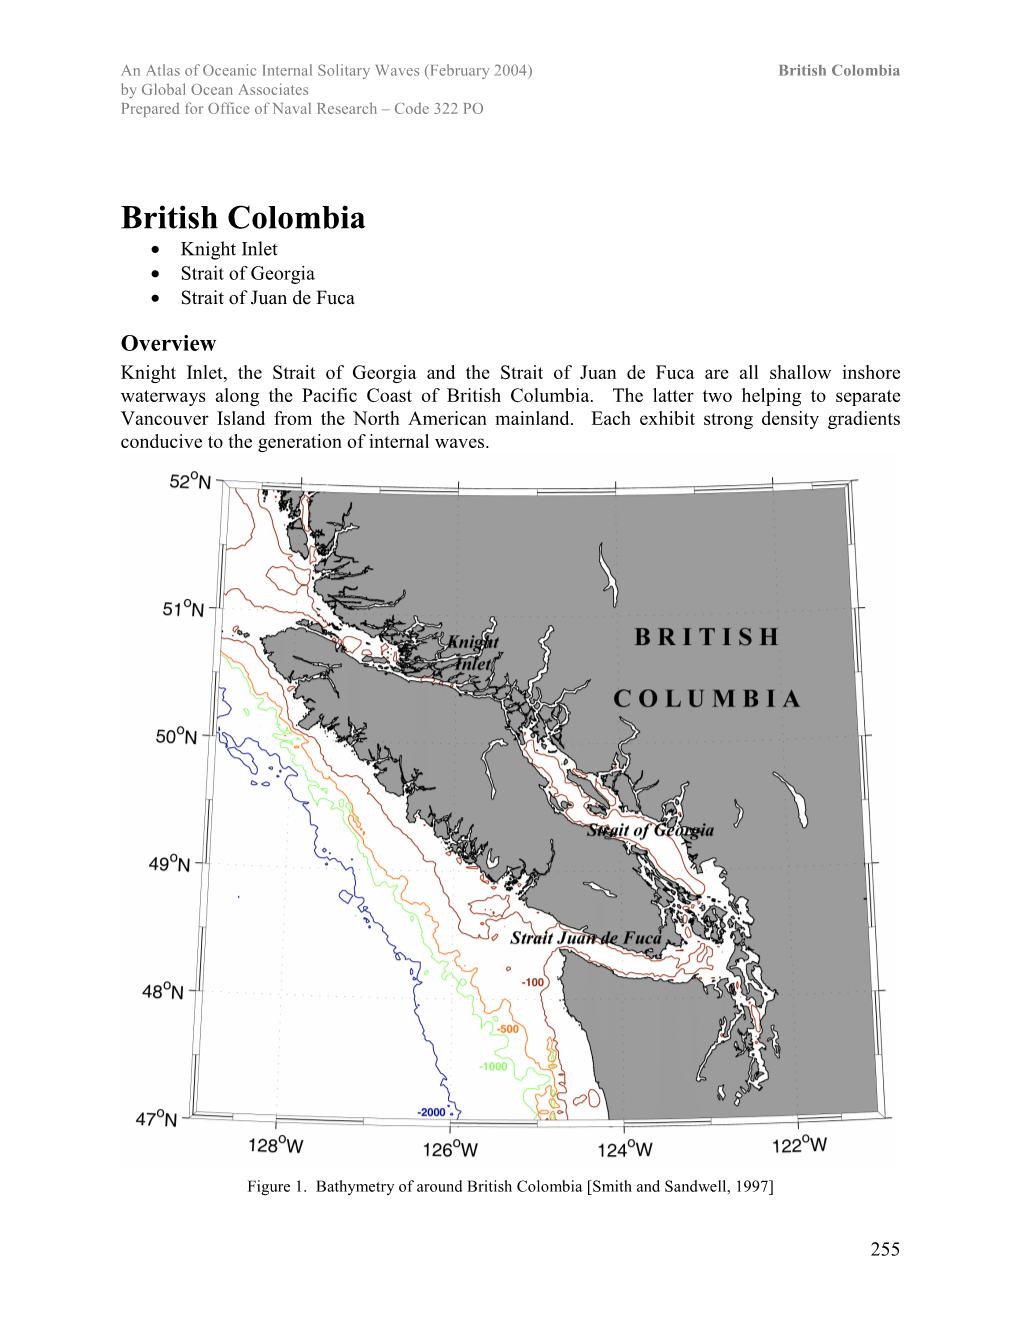 British Colombia by Global Ocean Associates Prepared for Office of Naval Research – Code 322 PO